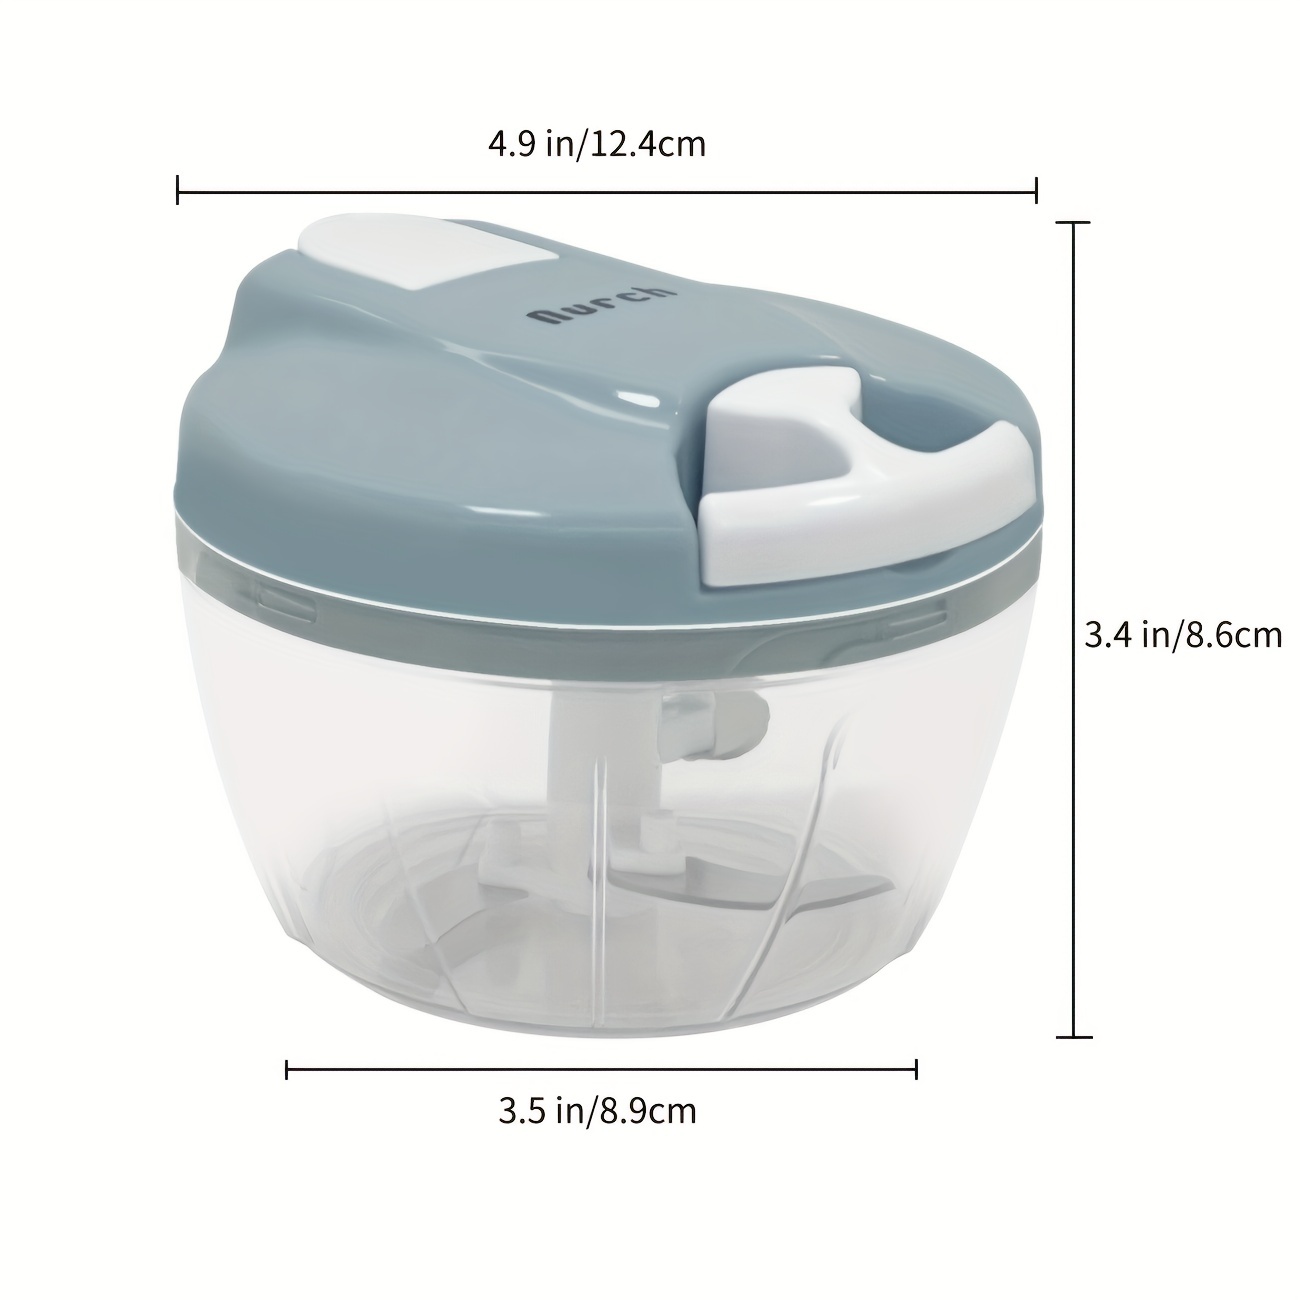 500ml Manual Food Chopper Vegetable Cutter, Portable Hand-pulled